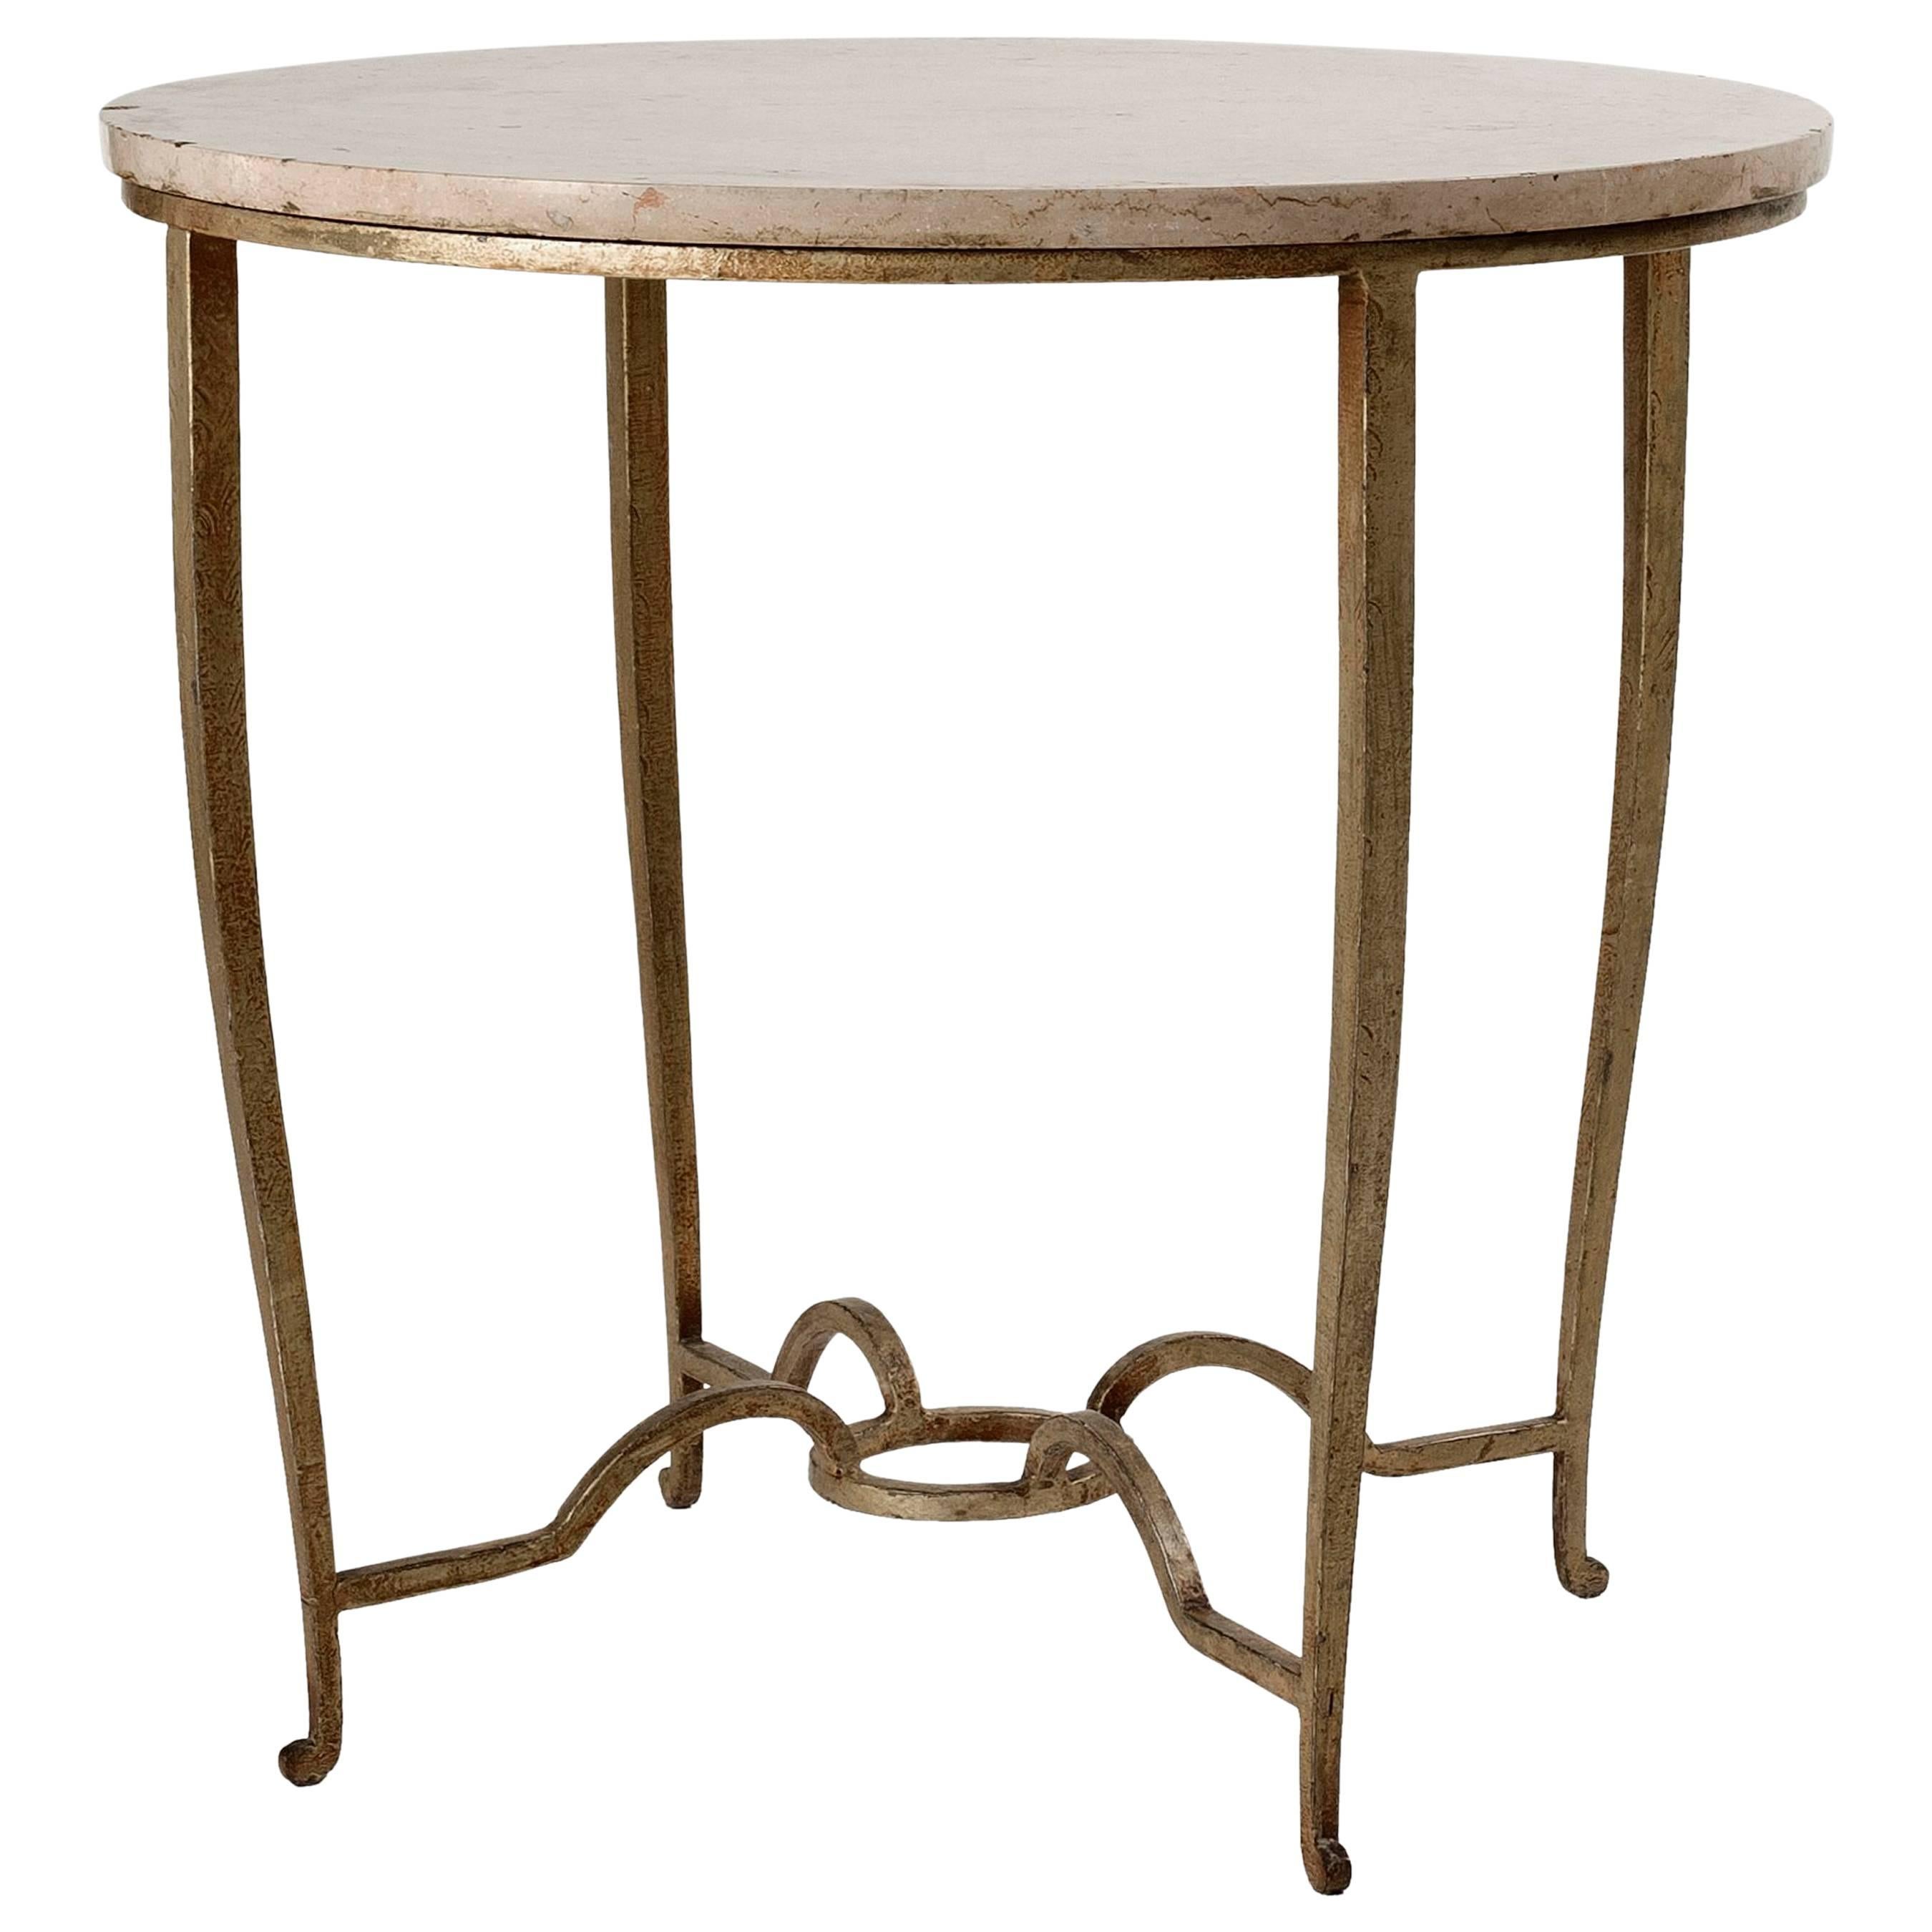 Maison Ramsay, Gilt wrought iron and travertine table, France, c. 1945